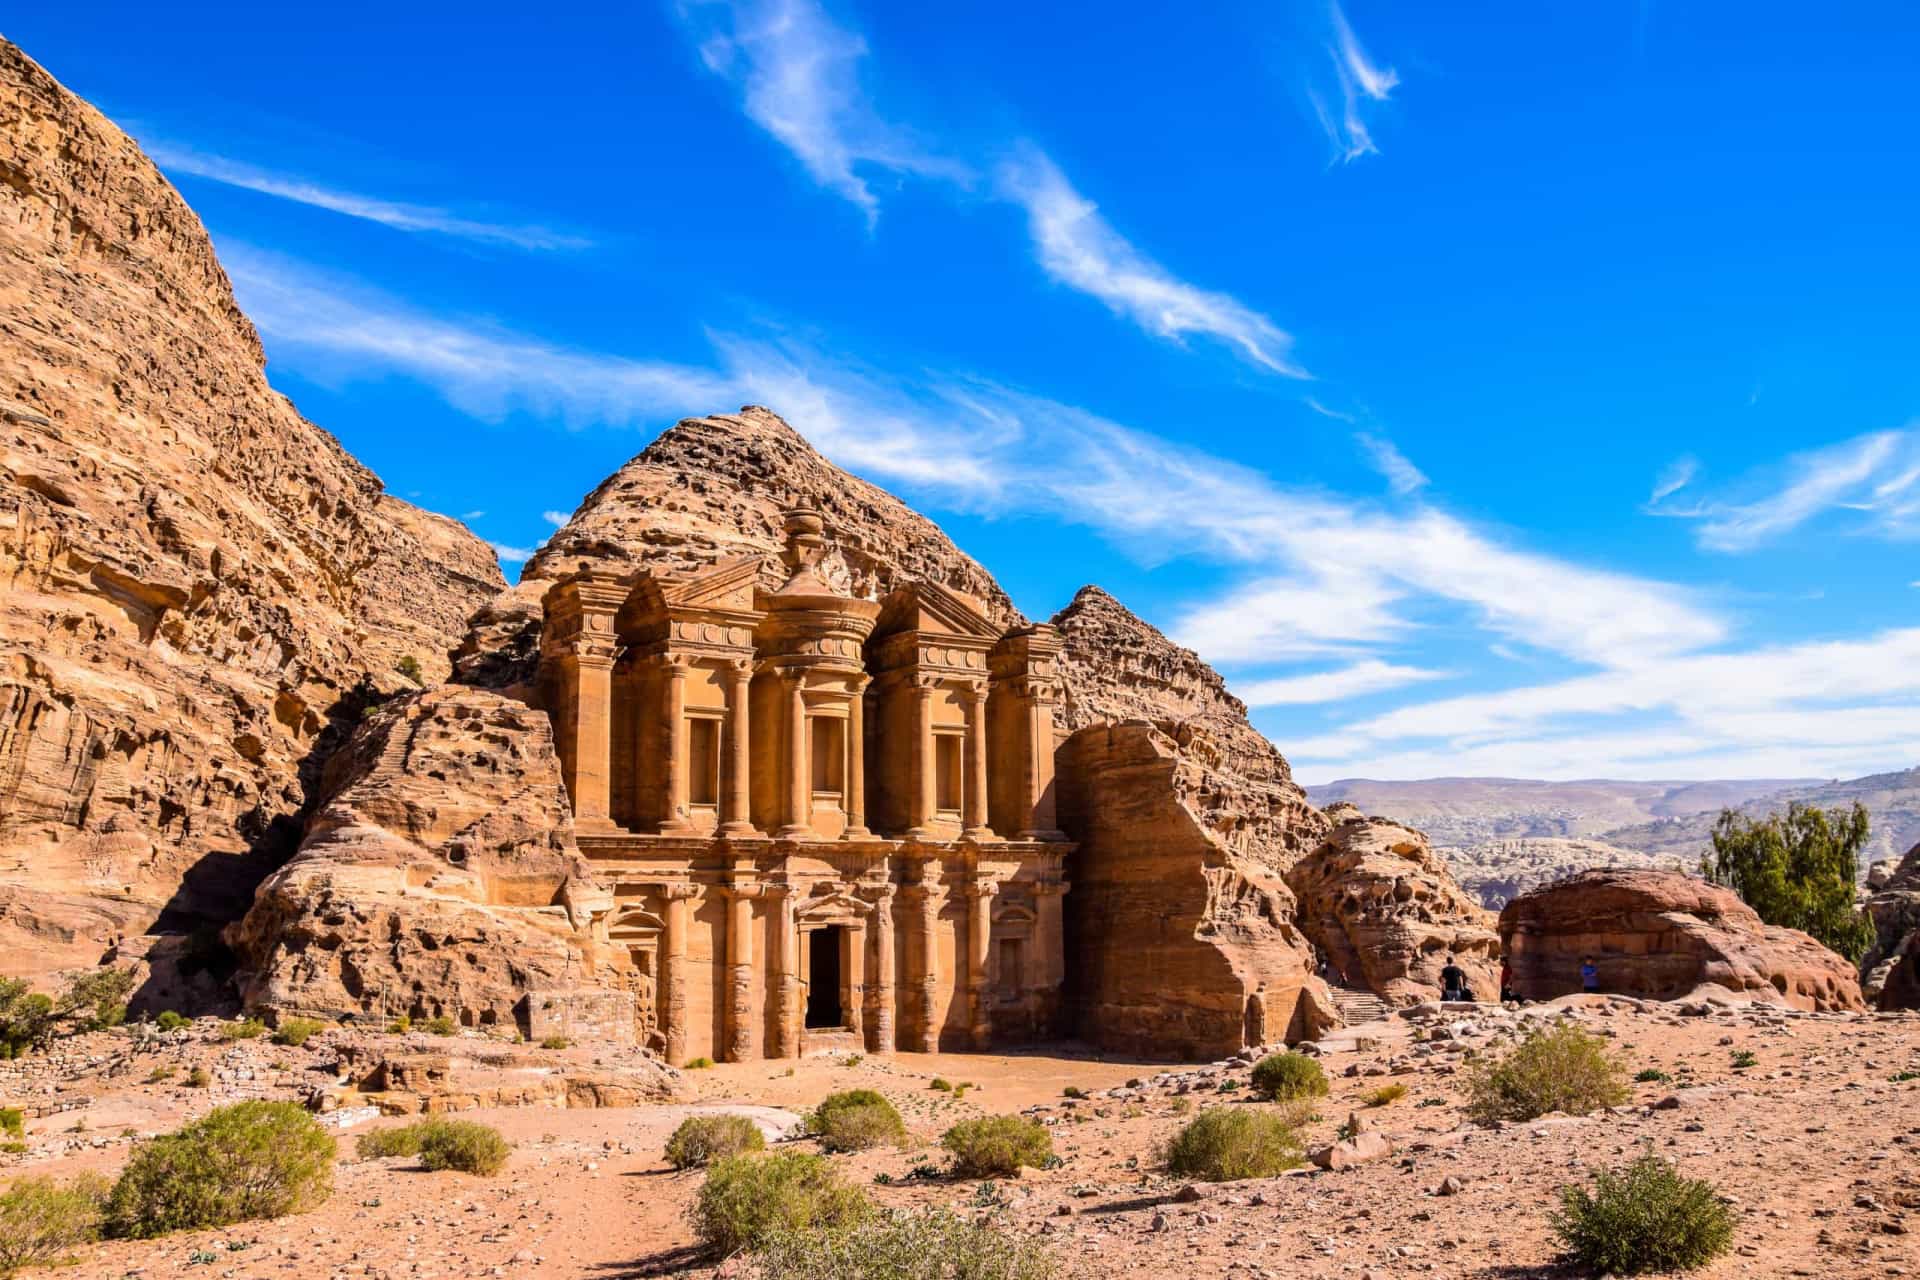 <p>The world-famous city of Petra, carved into the vibrant red rock cliffs of Jebel al-Madhbah, near the Dead Sea in southern Jordan, was known as "Sela" in the Bible. It was likely built circa 312 BCE by the Nabateans, a desert-dwelling Arab tribe.</p>